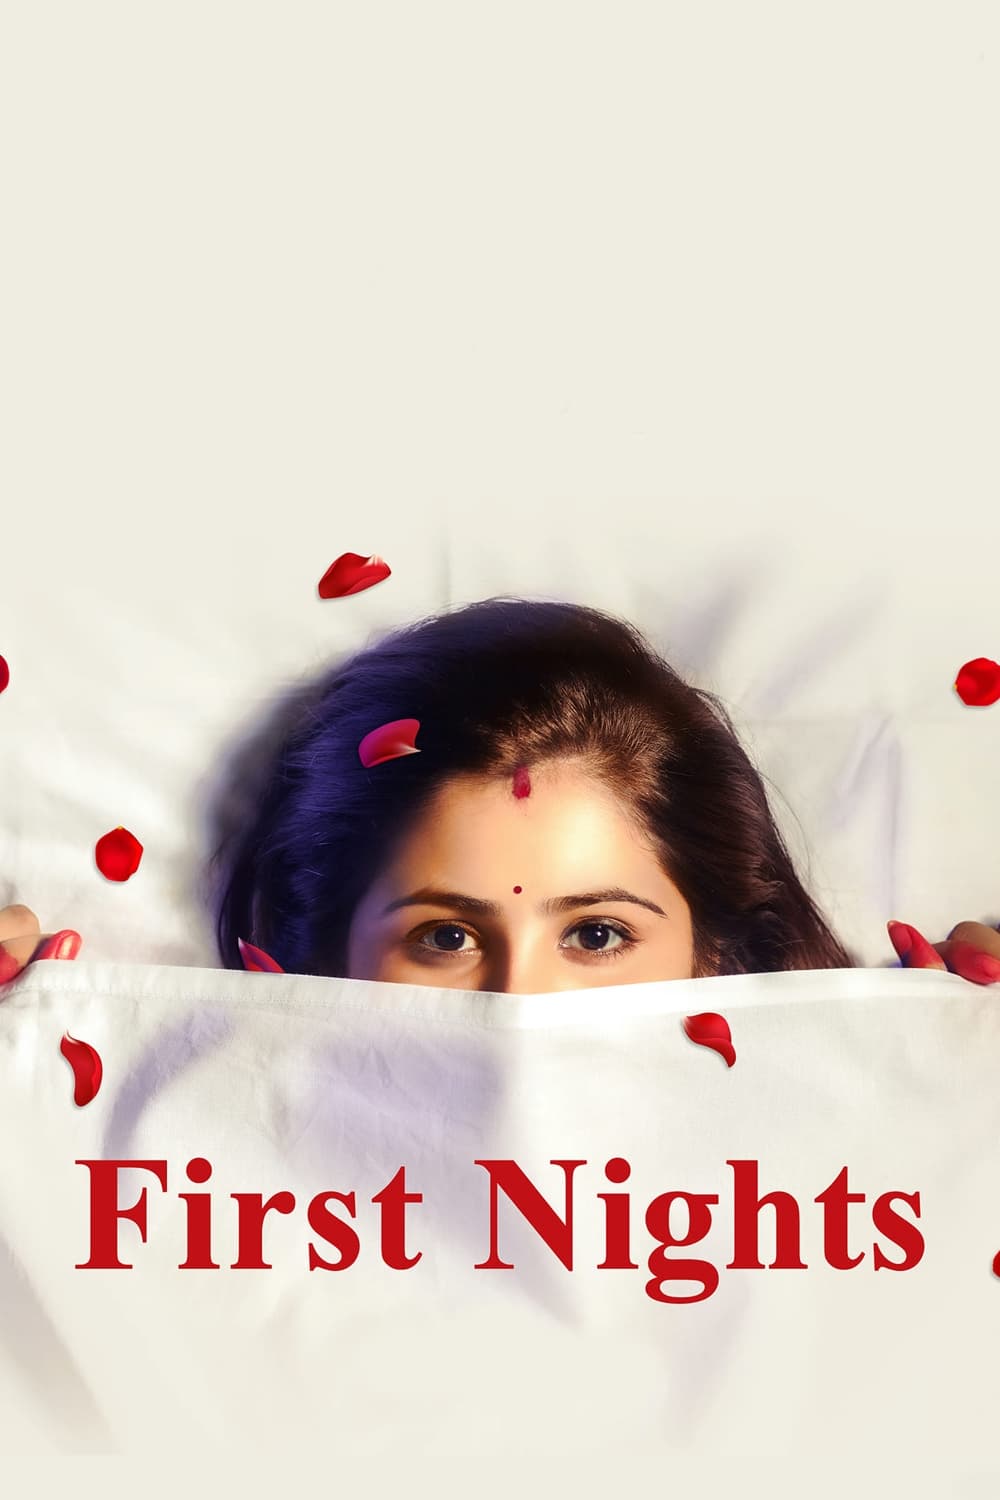 Poster for the movie "First Nights"